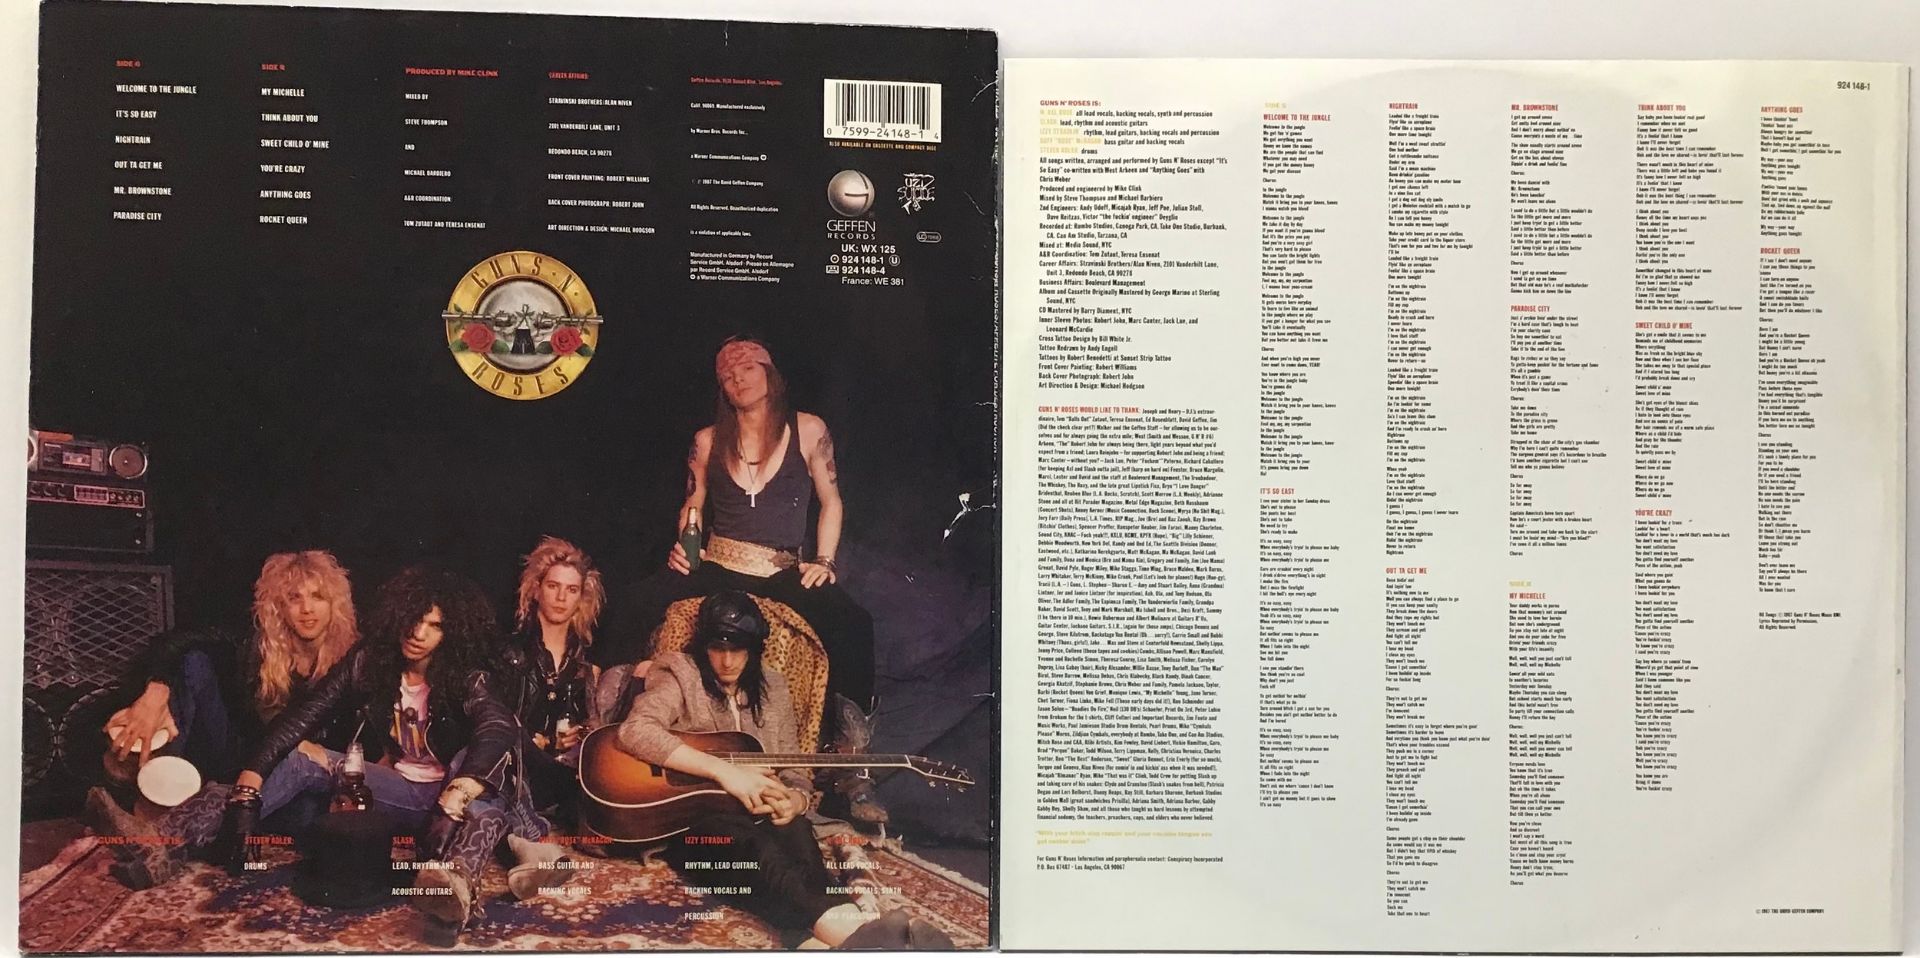 GUNS N' ROSES "APPETITE FOR DESTRUCTION" LP. Released on Geffen Records WX 125 in 1987 and found - Image 2 of 2